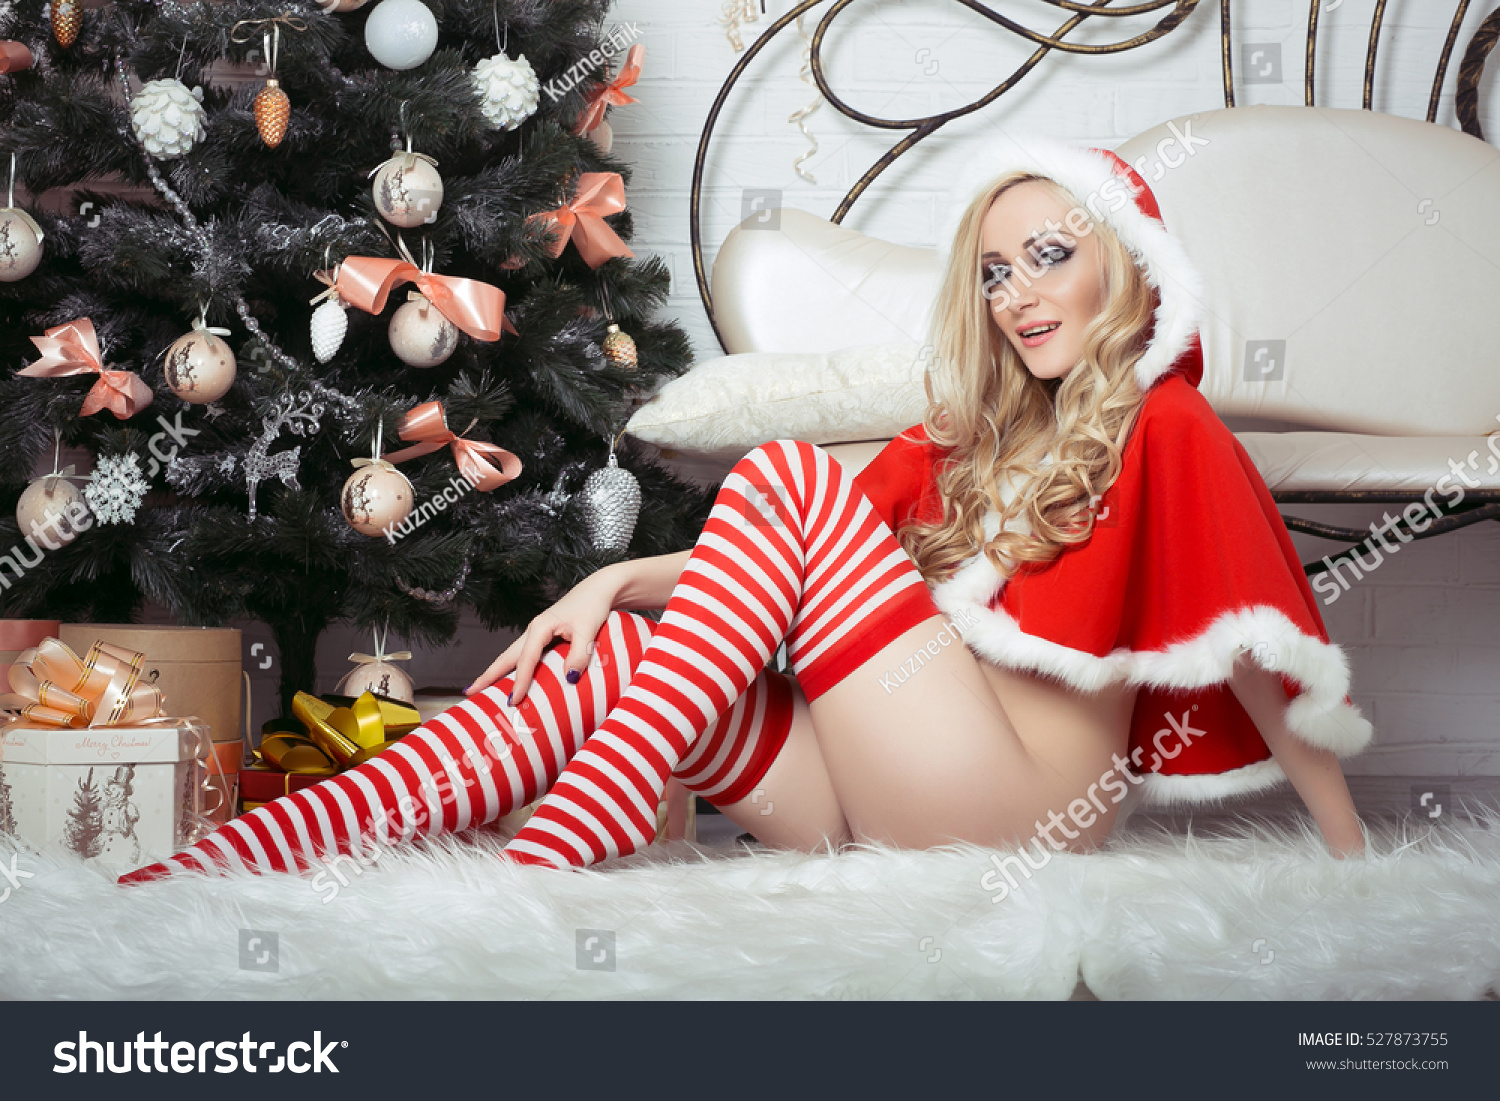 Sexy red stockings on a beauty